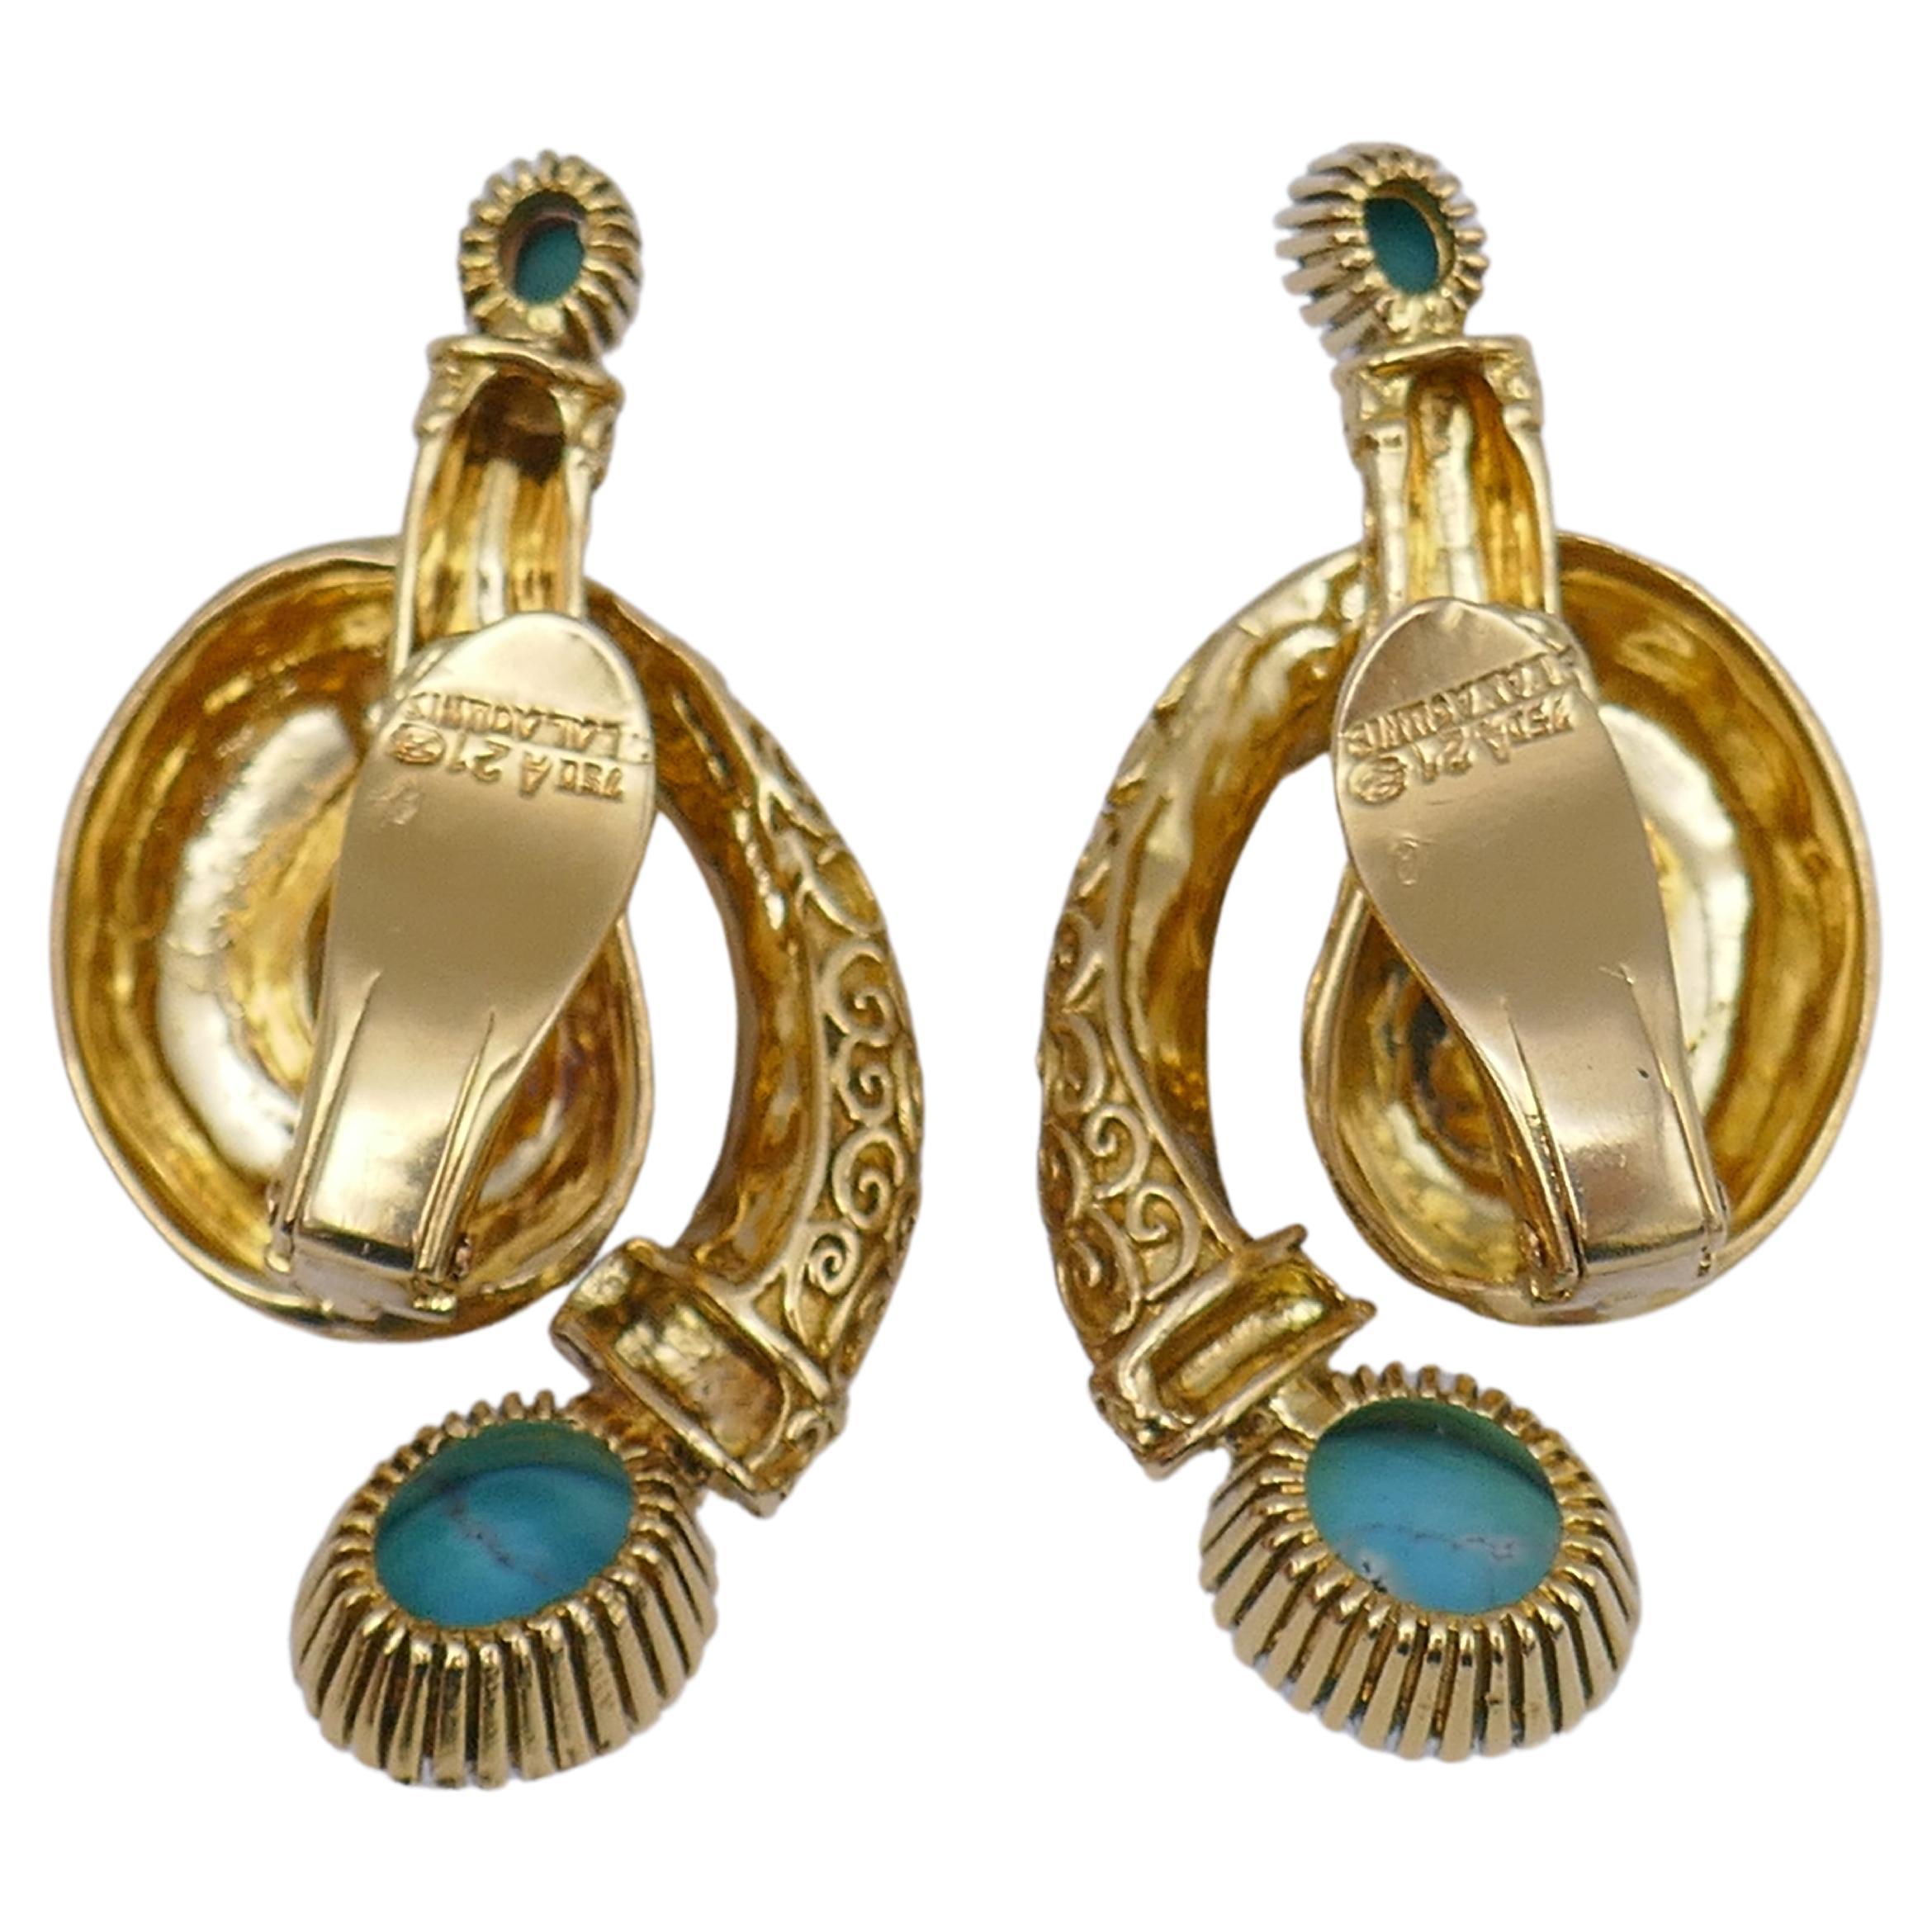 A gorgeous pair of clip-on earring by Ilias Lalaounis. Made of 18k yellow gold, featuring cabochon turquoise. Stamped with Lalaounis maker's mark and a hallmark for 18k gold.
Measurements: 1.5